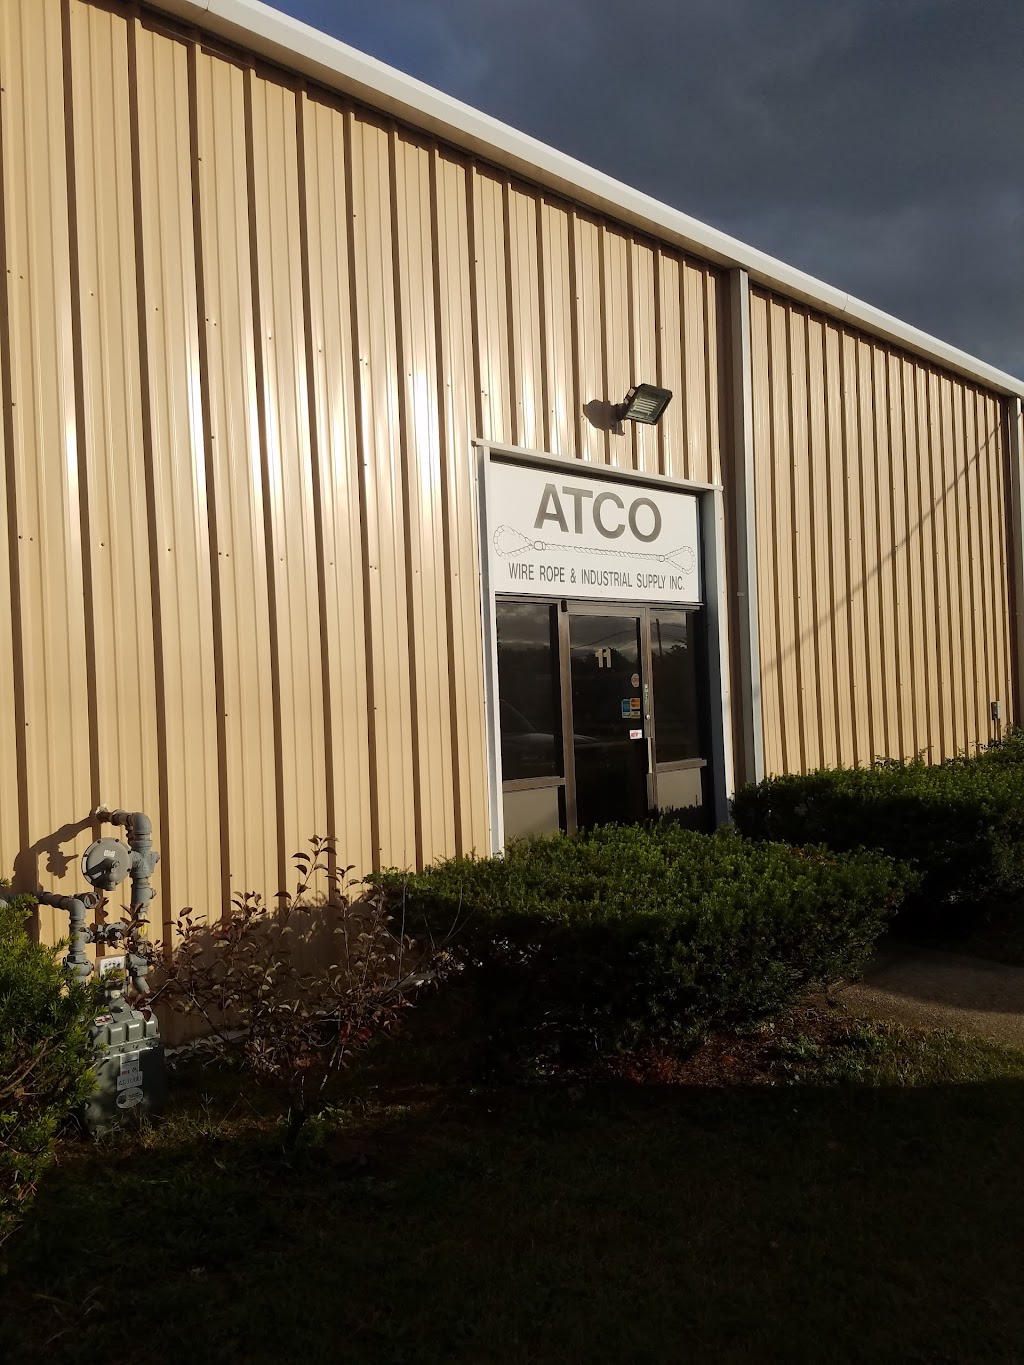 Atco Wire Rope & Industrial Supply | 11 Leonardo Dr, North Haven, CT 06473 | Phone: (203) 239-1632